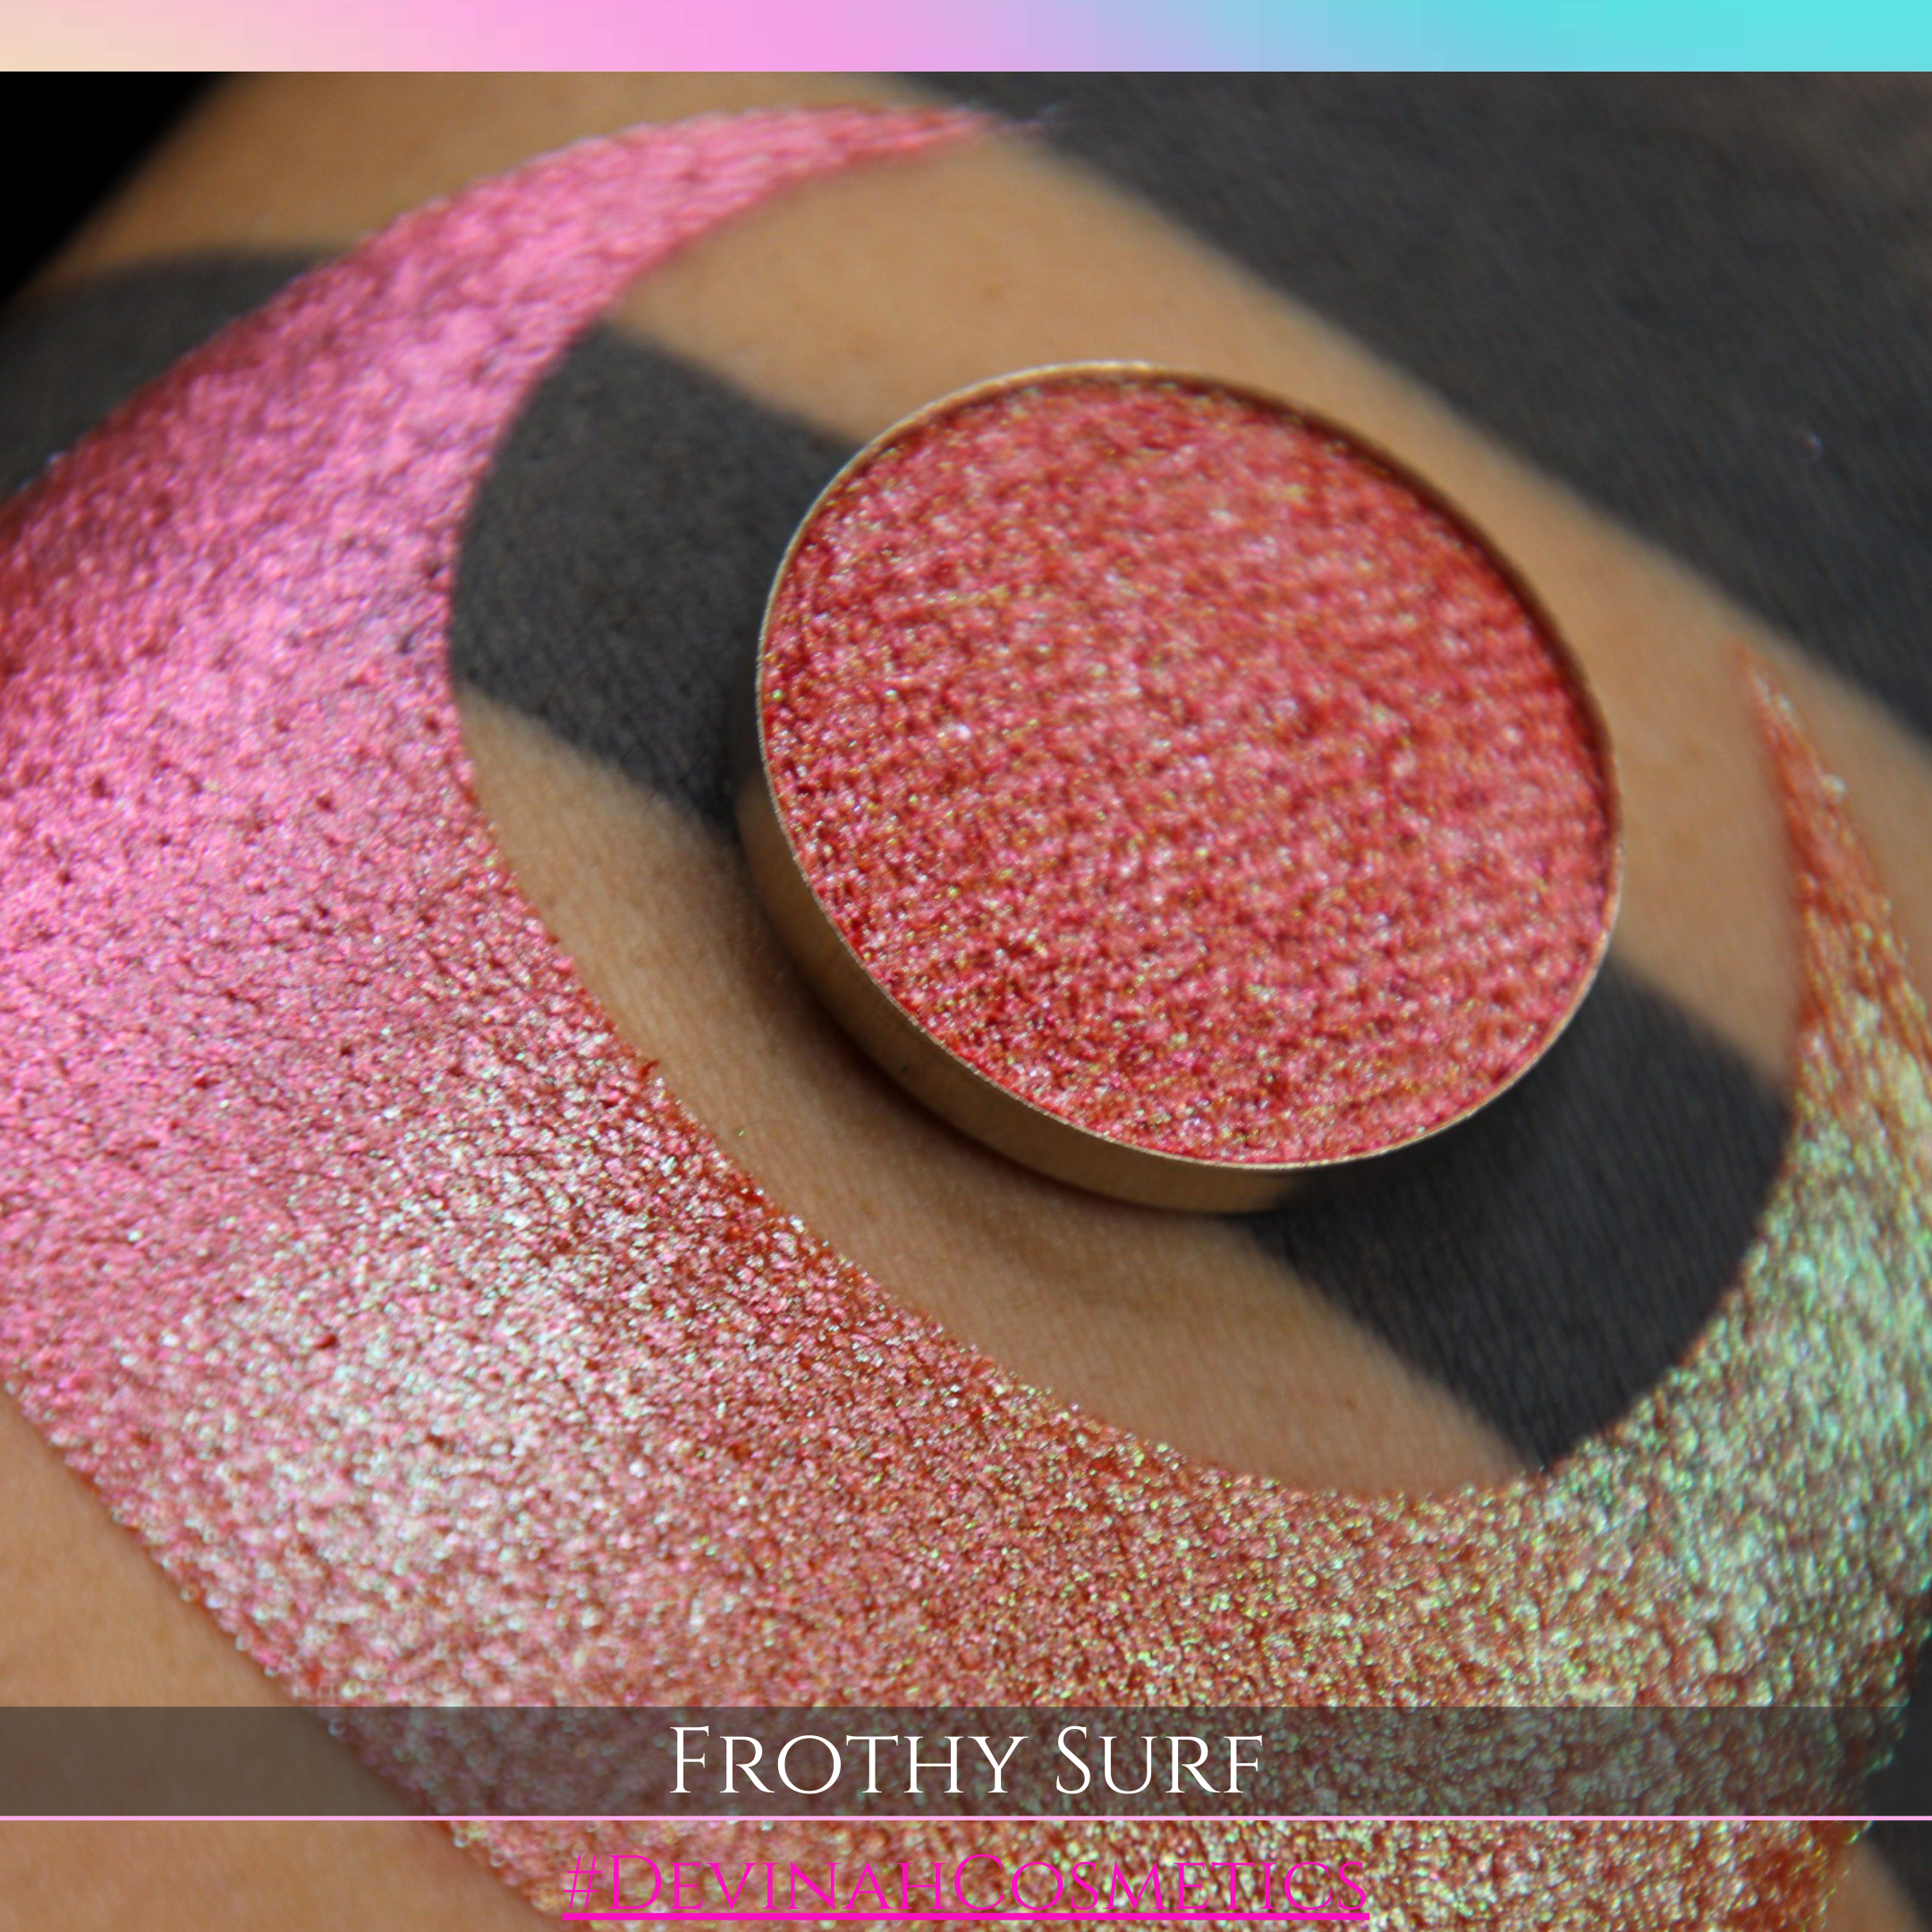 FROTHY SURF Pressed Pigment